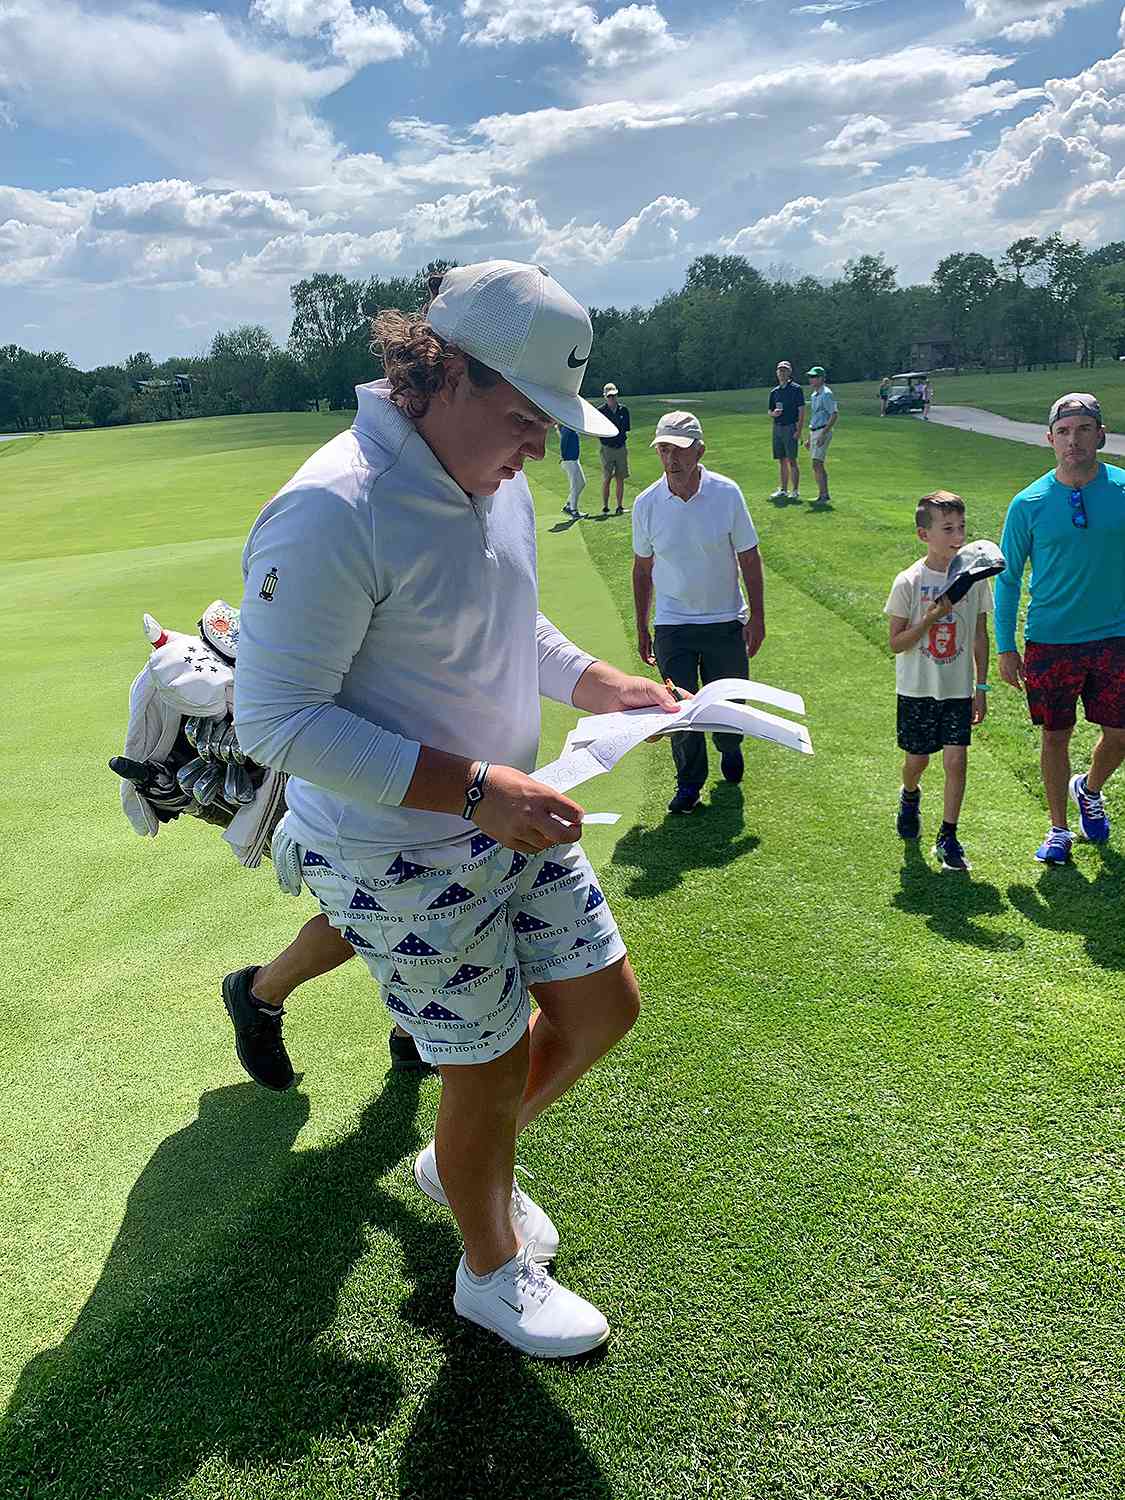 John Daly's Son Places Second in Junior Tournament